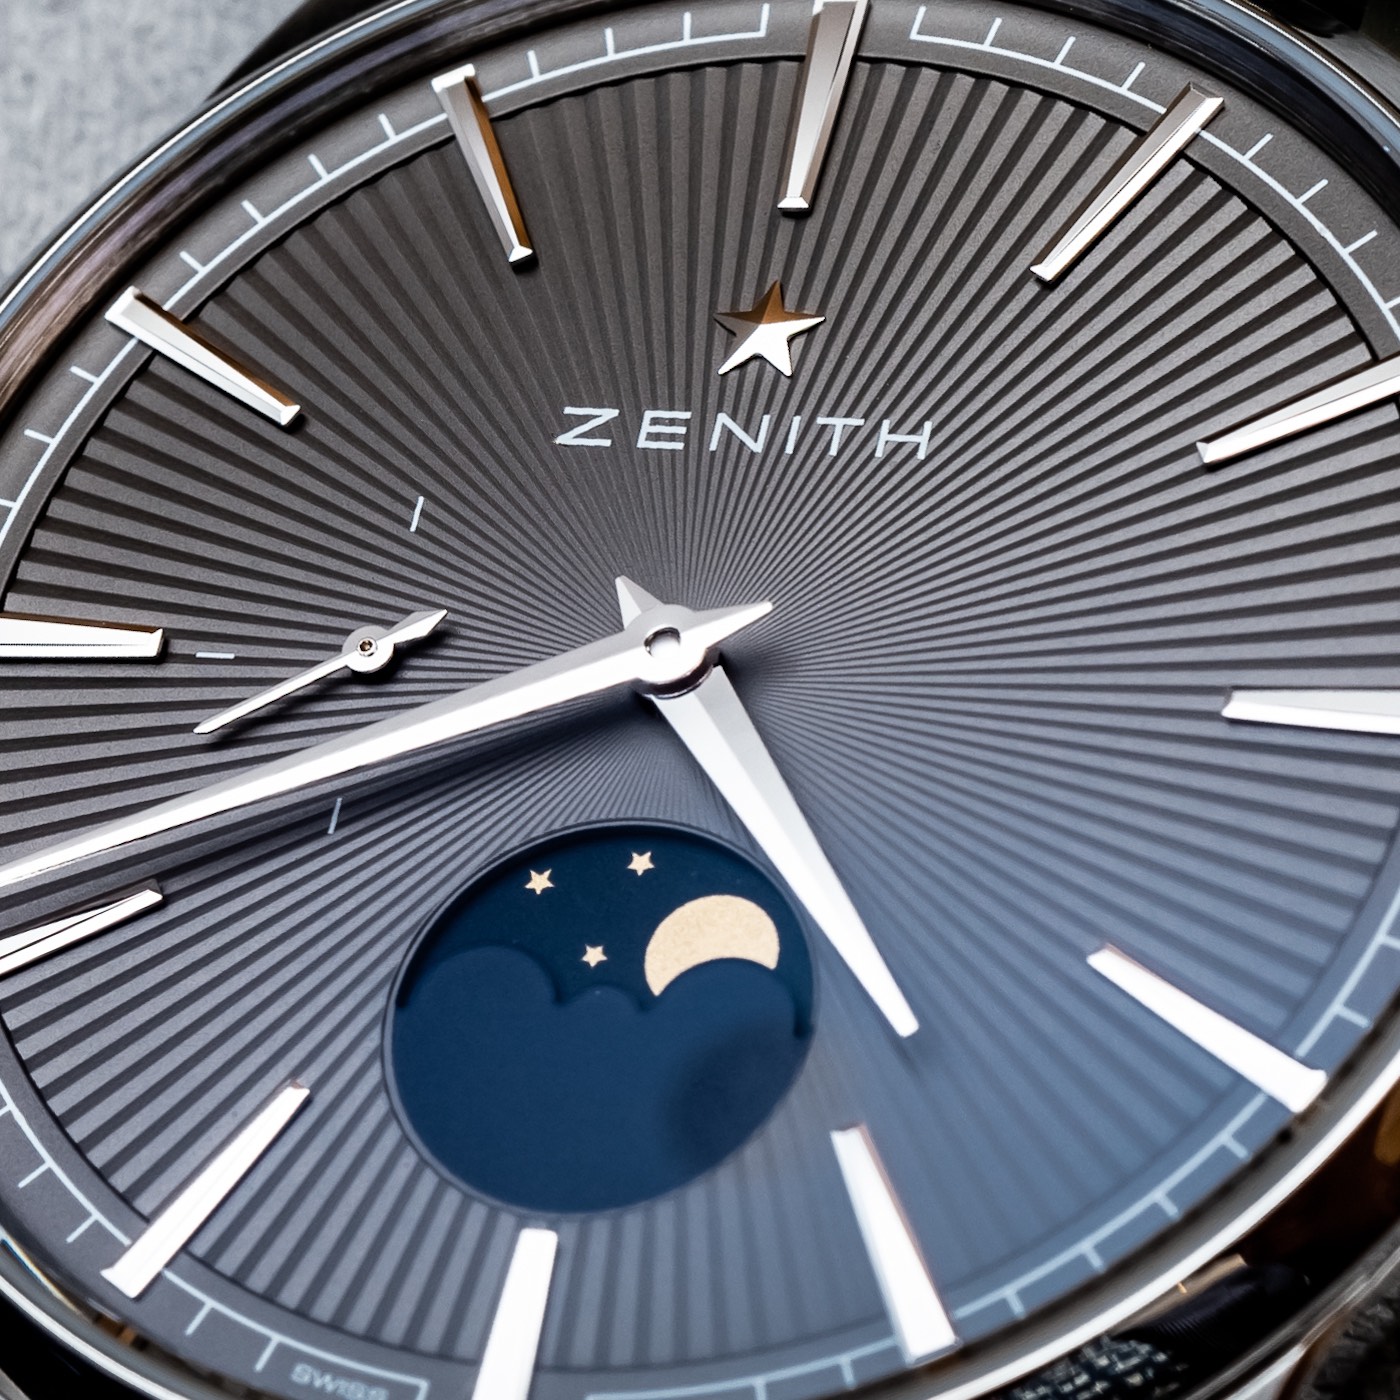 Hands-On: Updated Zenith Elite Classic & Elite Moonphase Watches For 2020 Hands-On 